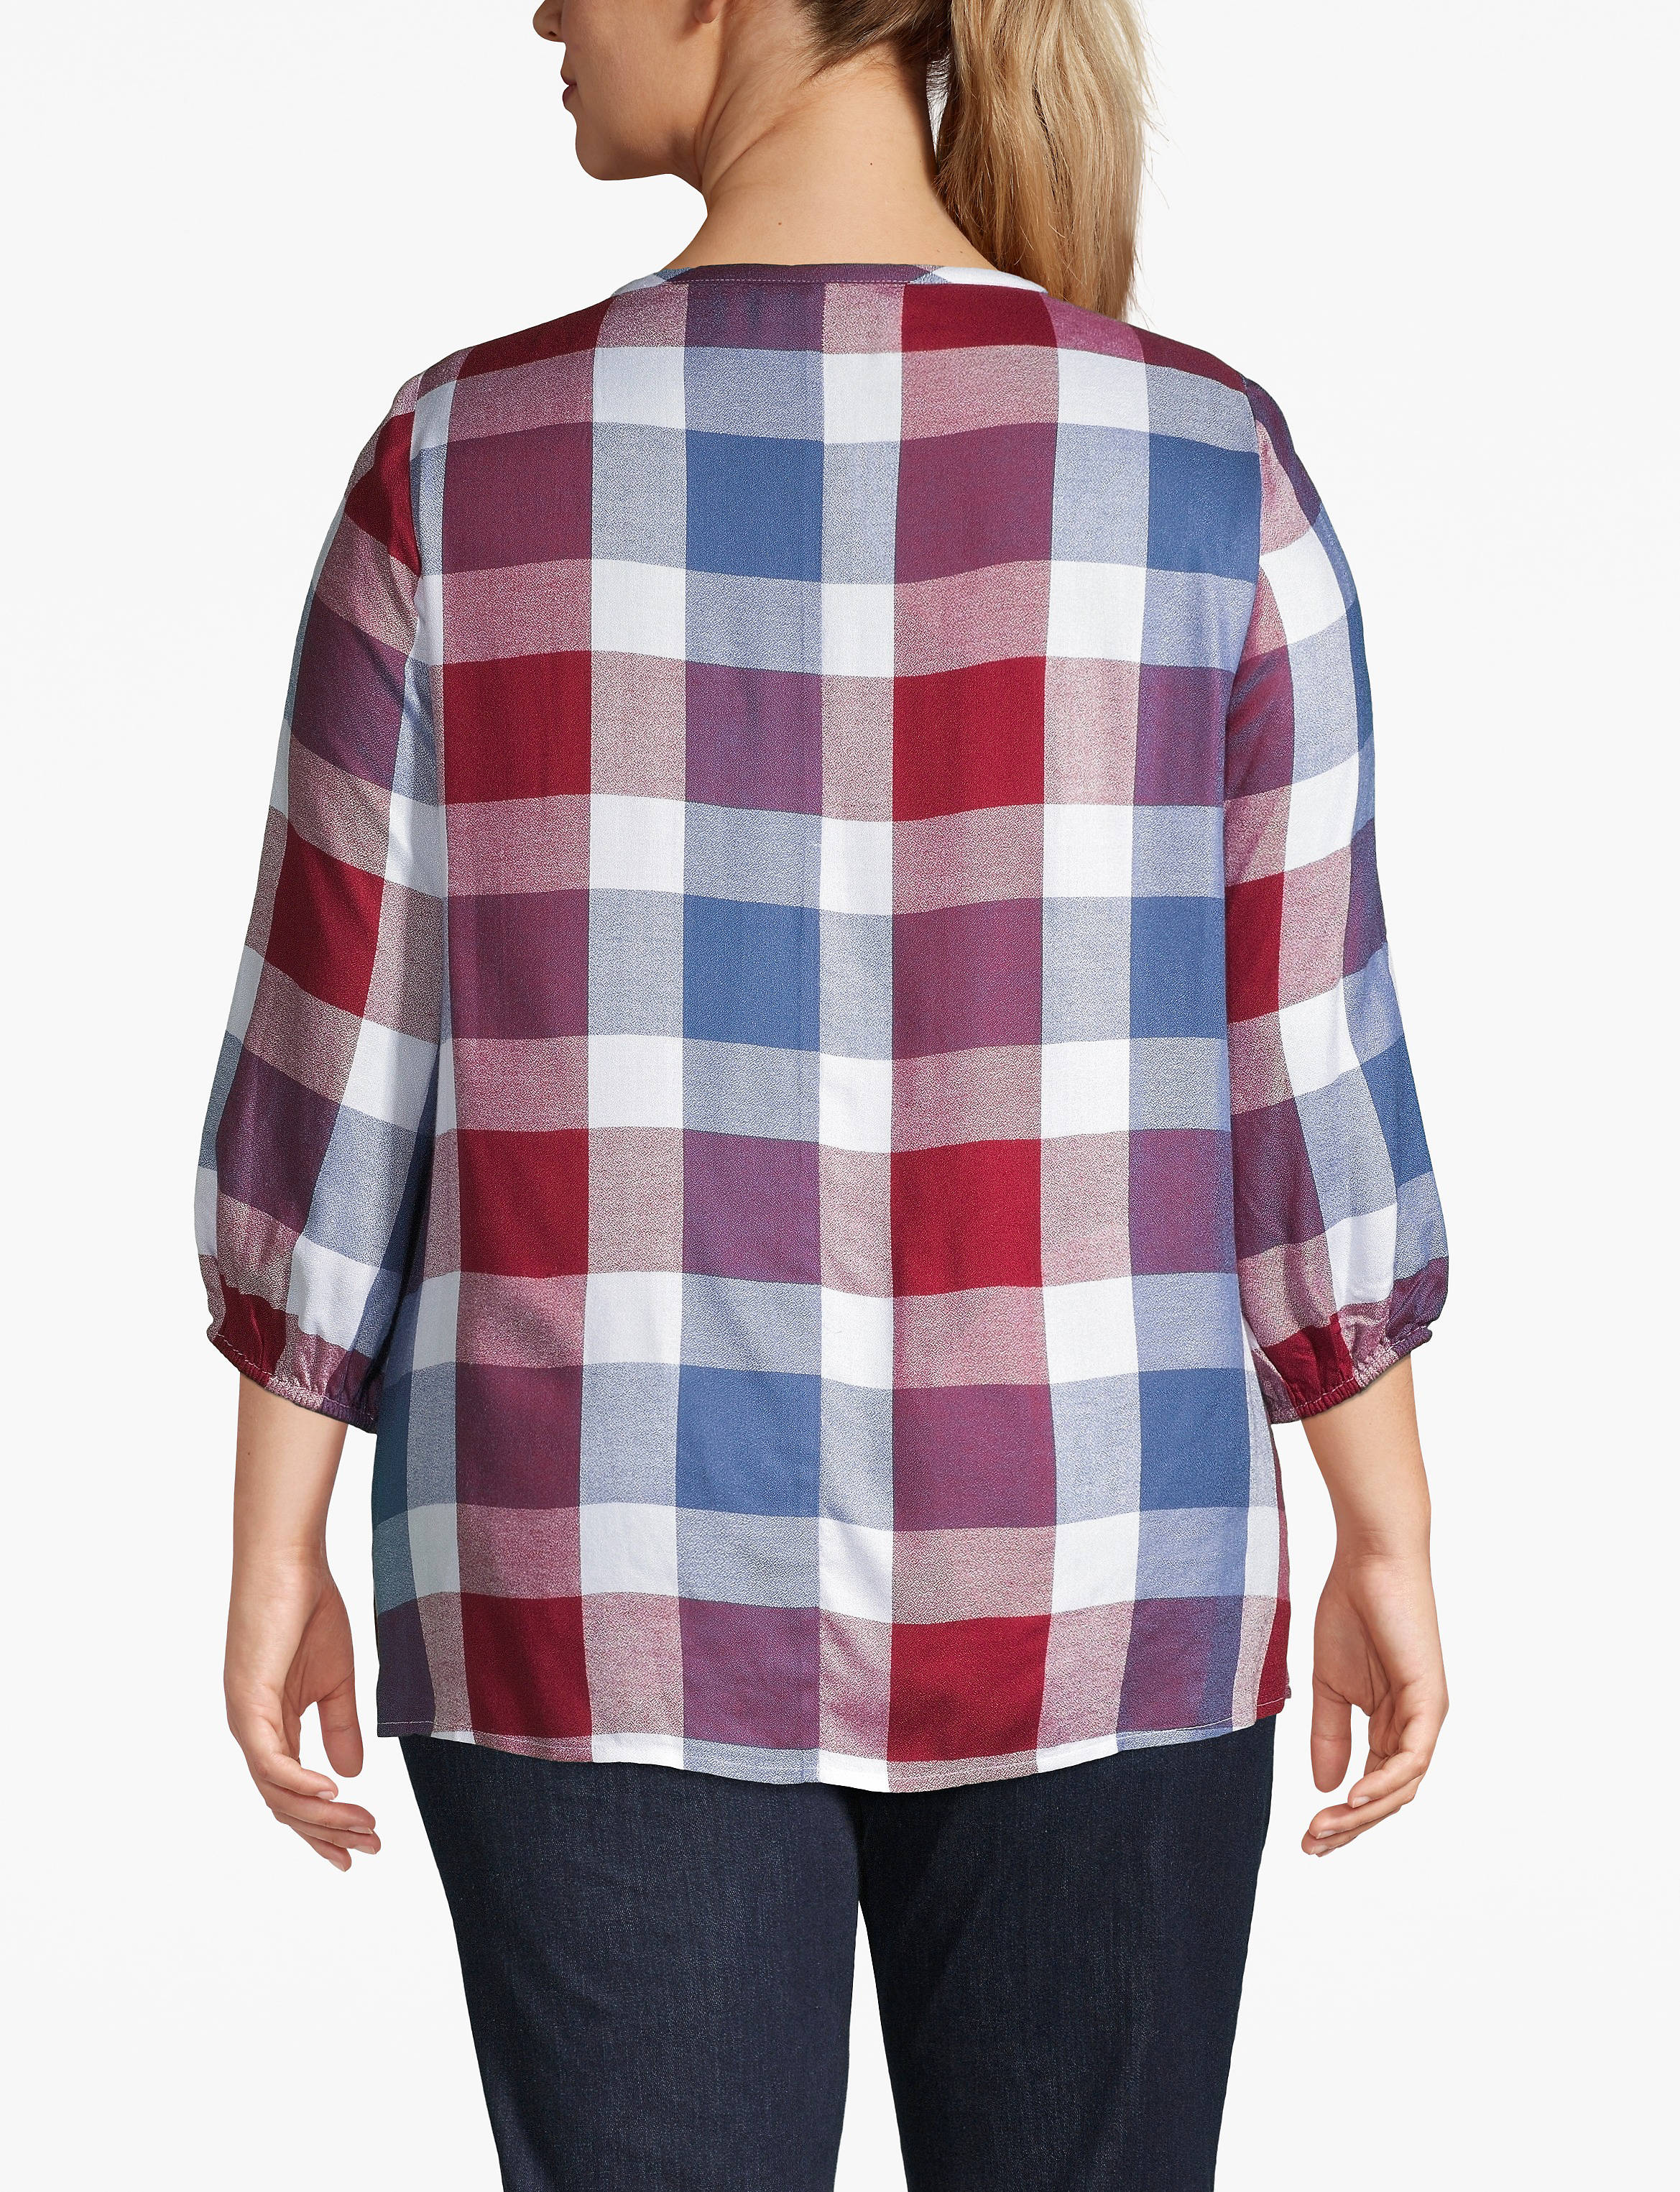 3/4 Sleeve Scoop Neck Peasant Blouse :blue/ red/ white buffalo check - as hanger:14 Product Image 2